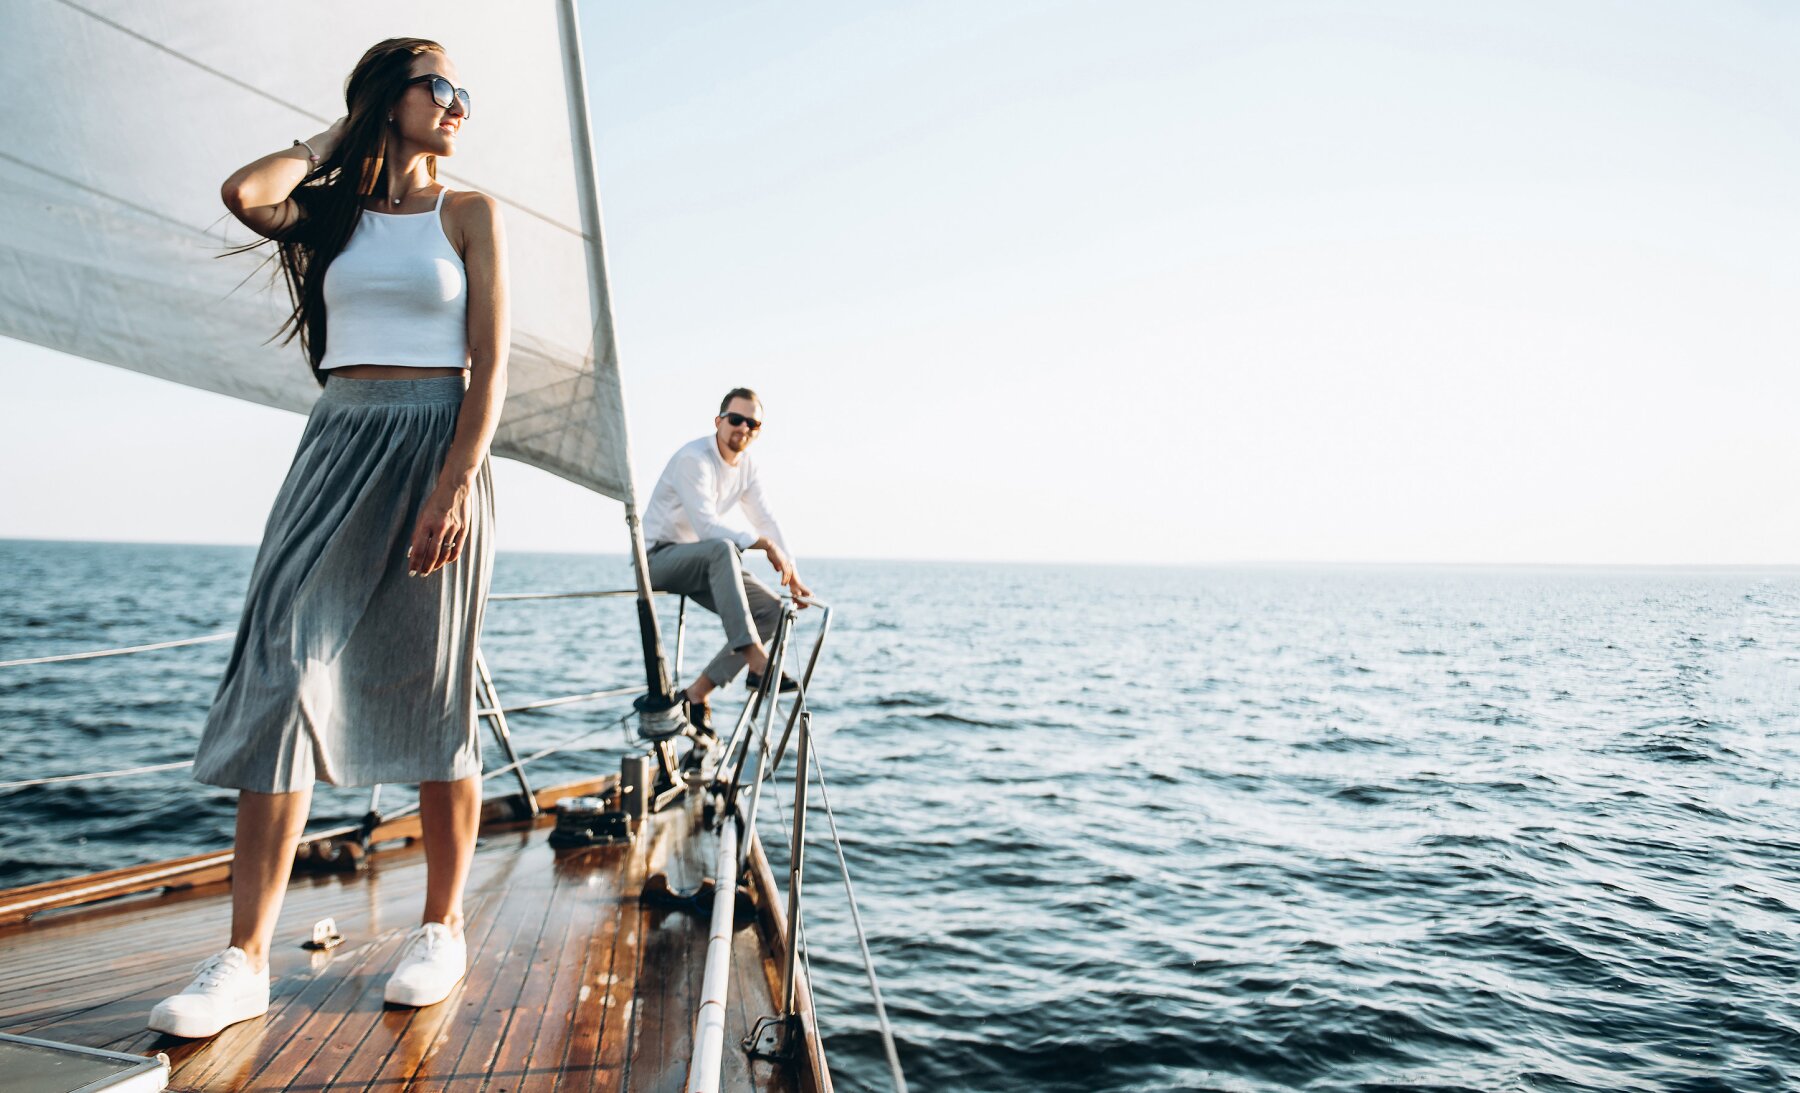 401(k) Management Indianapolis feature - Young woman on a sailboat